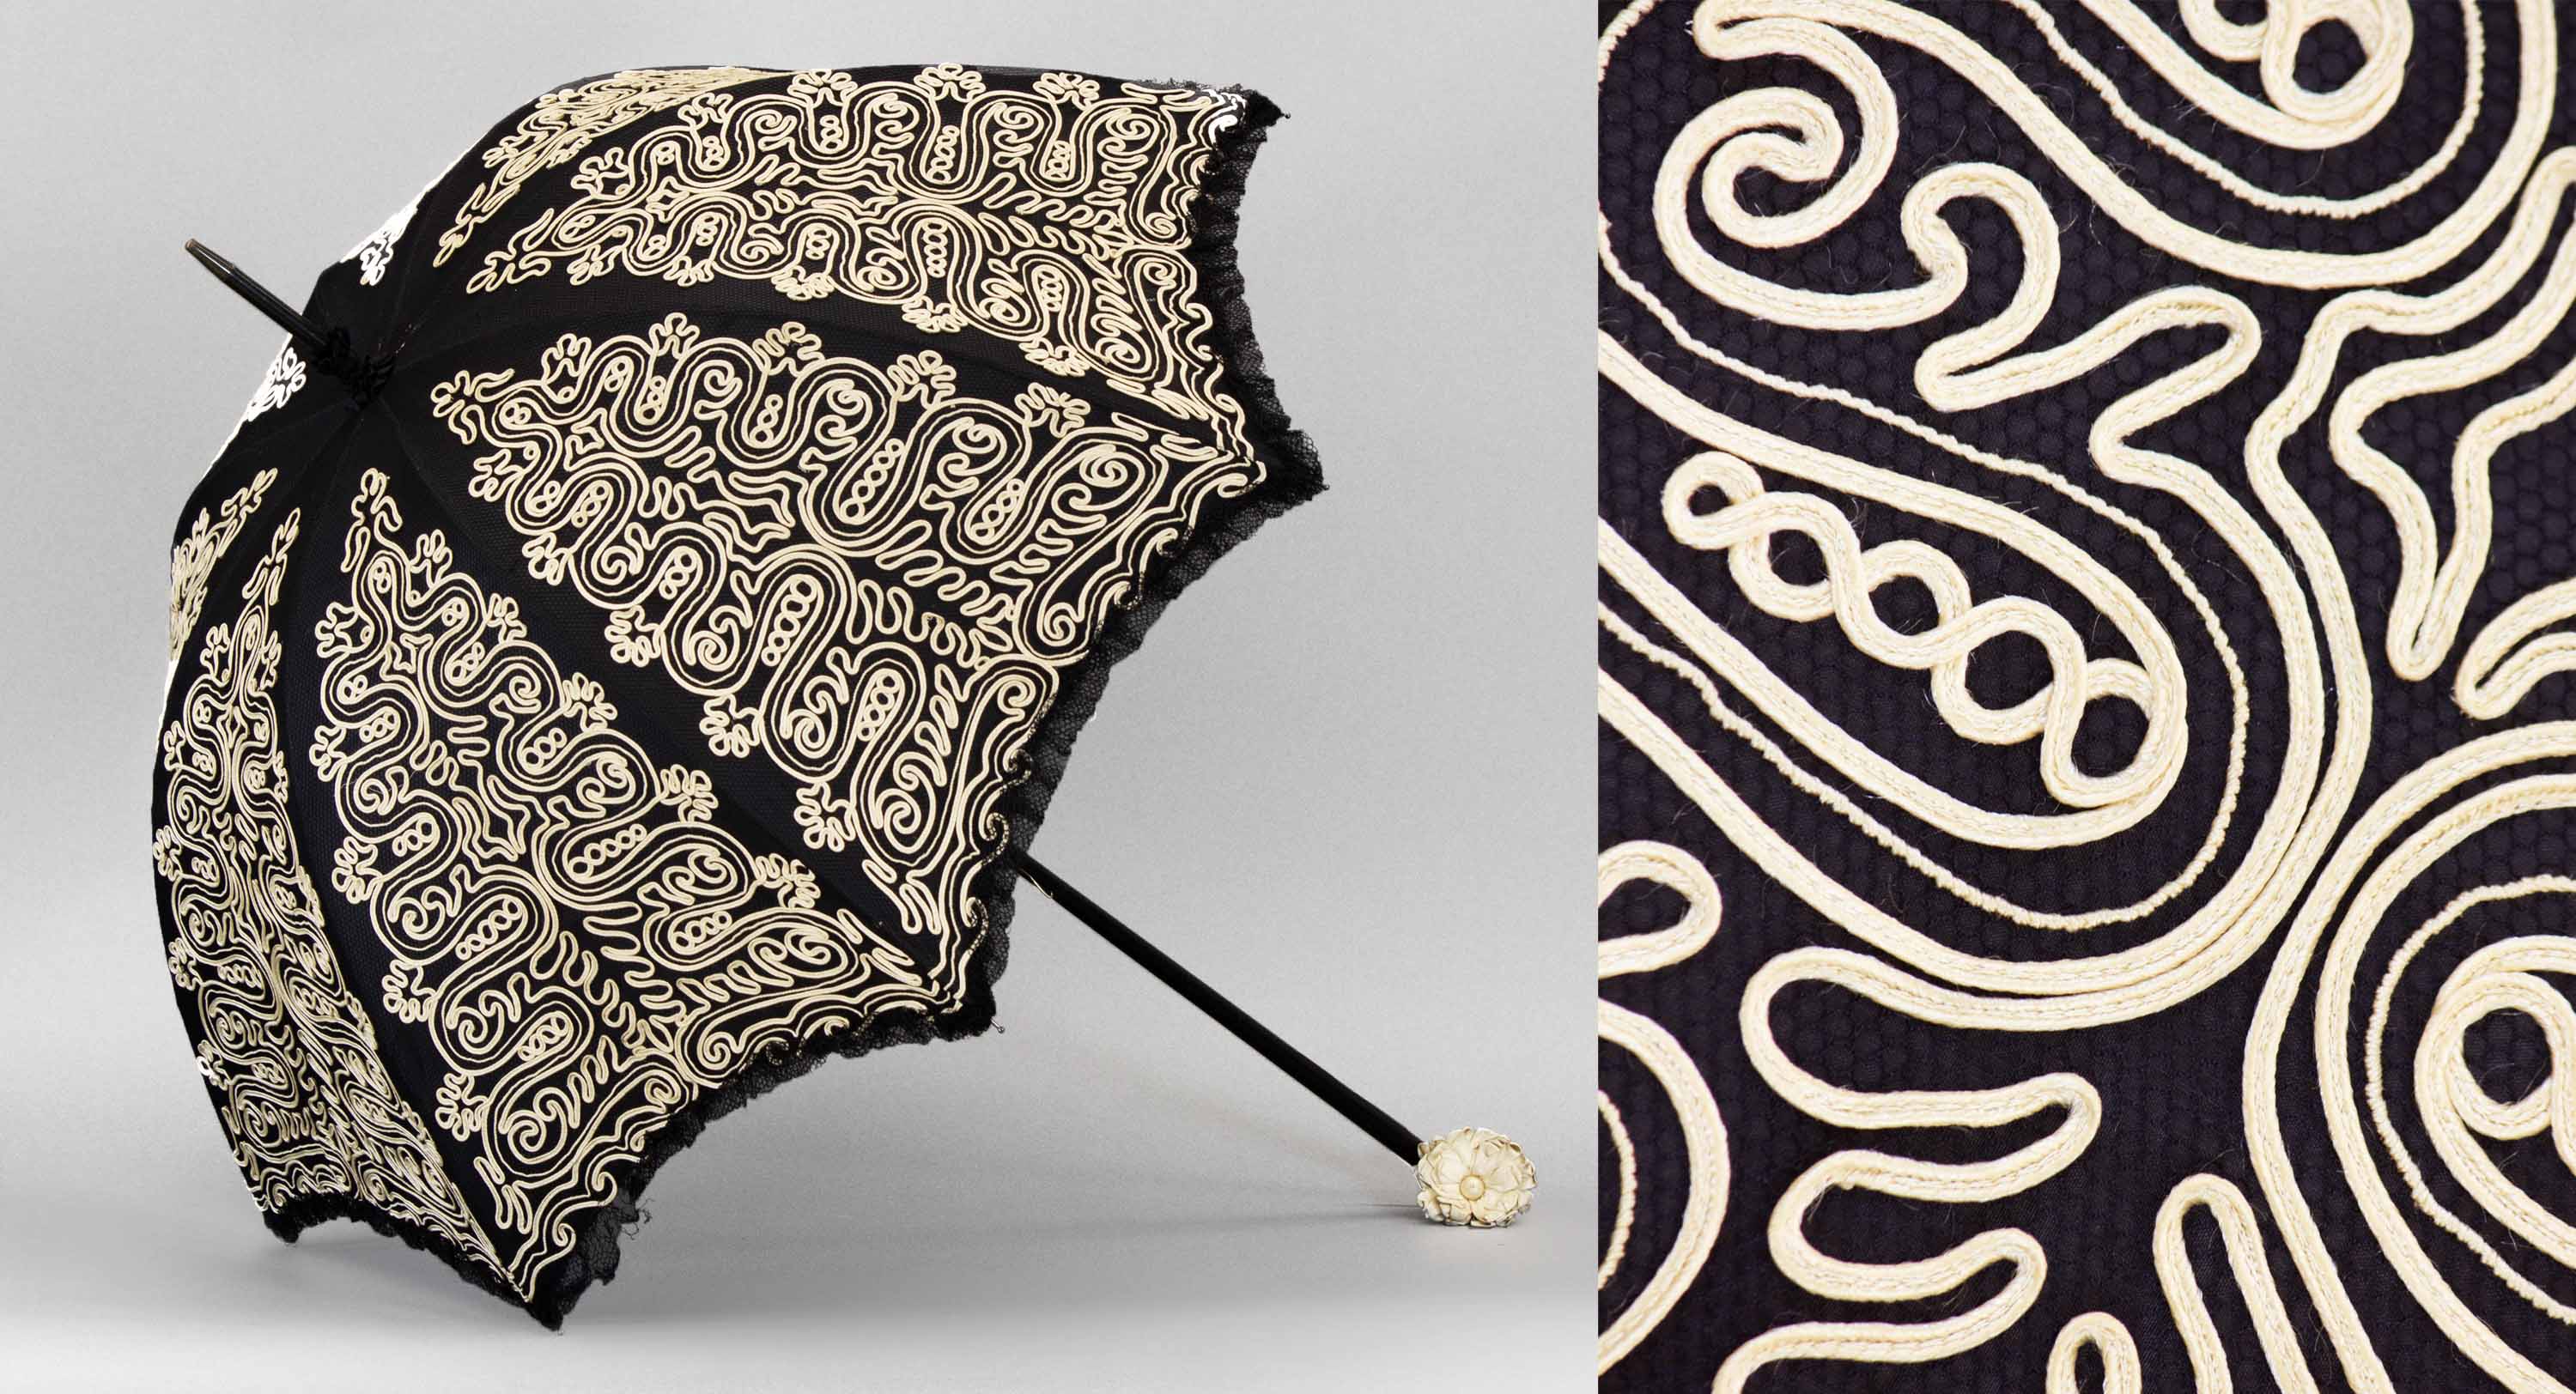 A black silk parasol with cream embroidery on the left and a close up of the pattern on the right